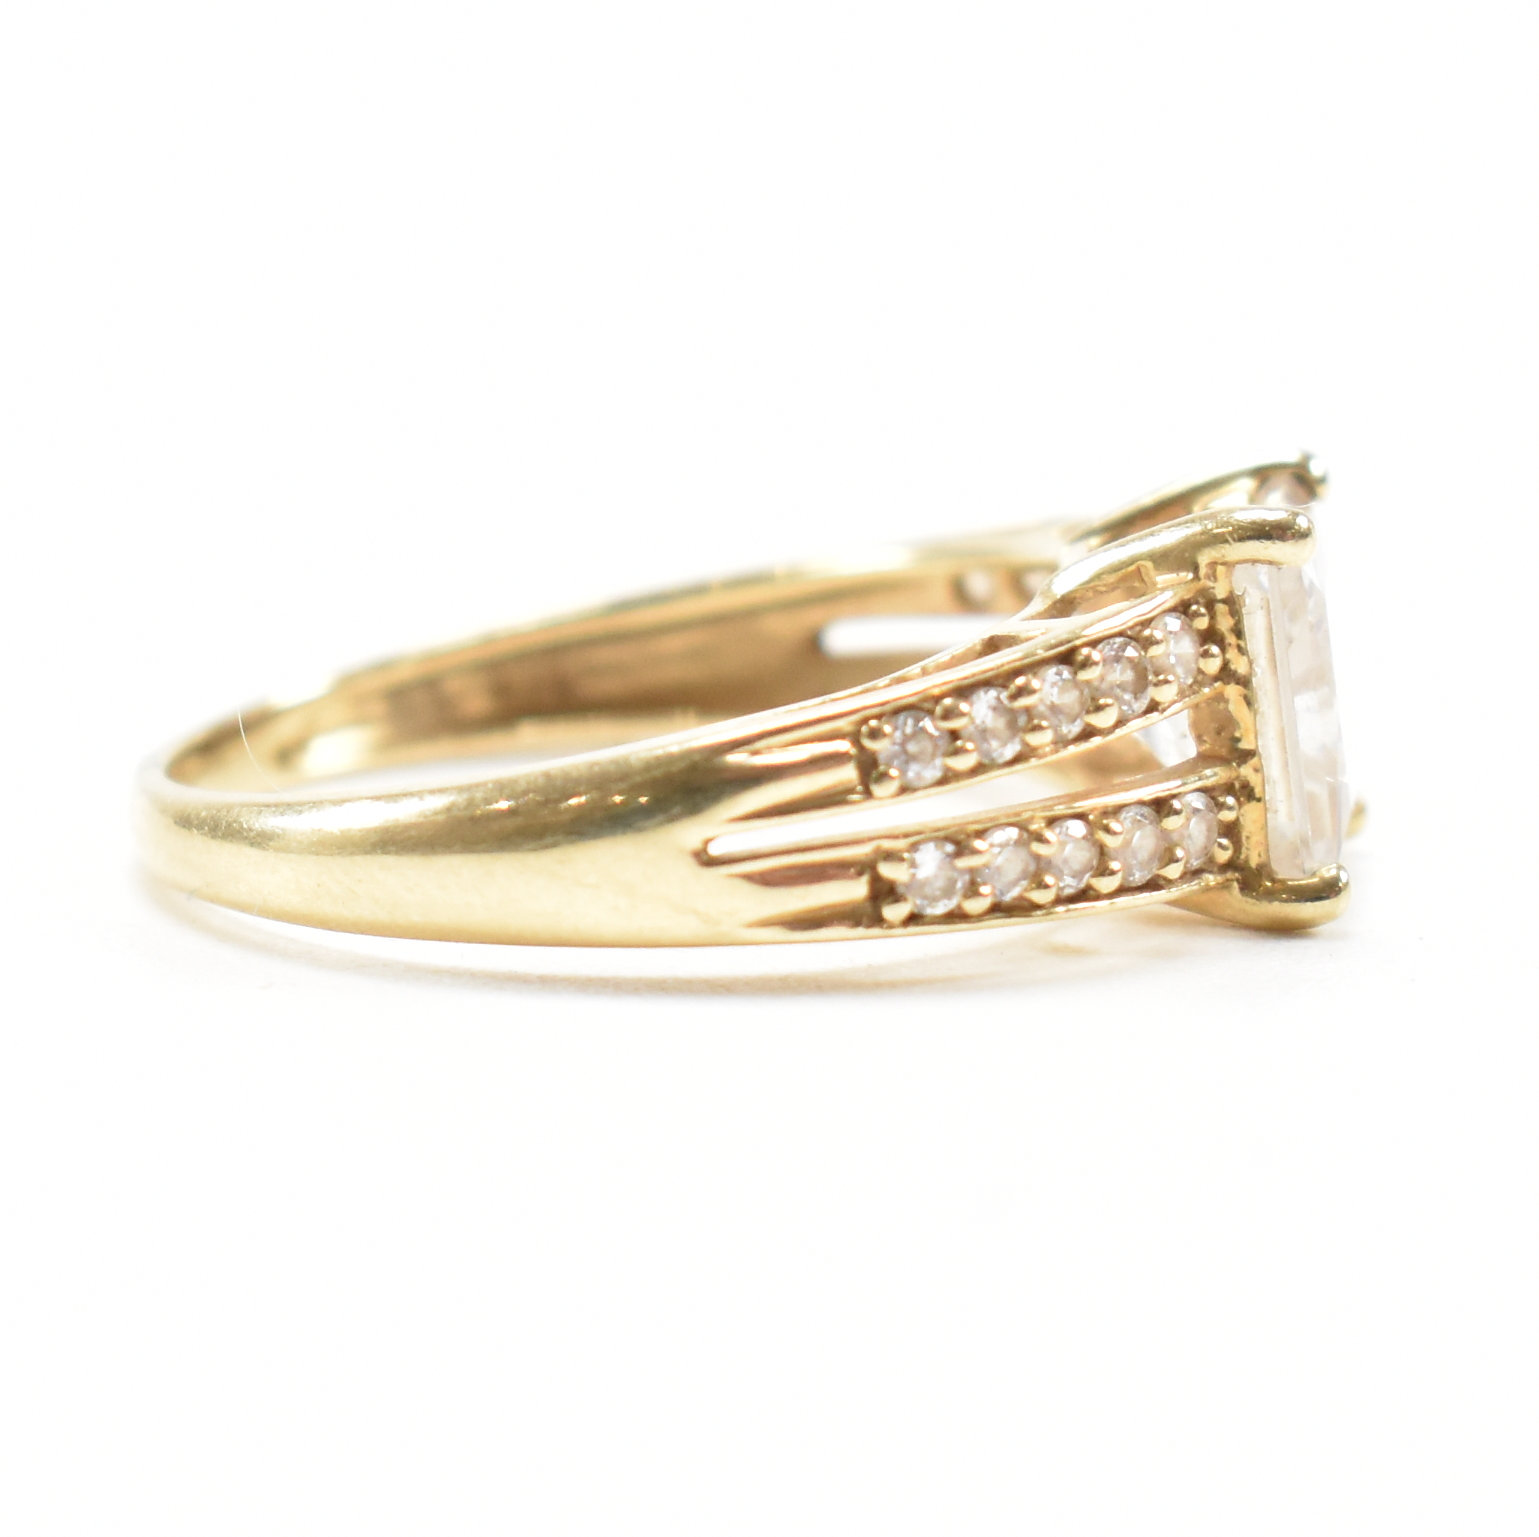 HALLMARKED 14CT GOLD & CUBIC ZIRCONIA RING - Image 5 of 9